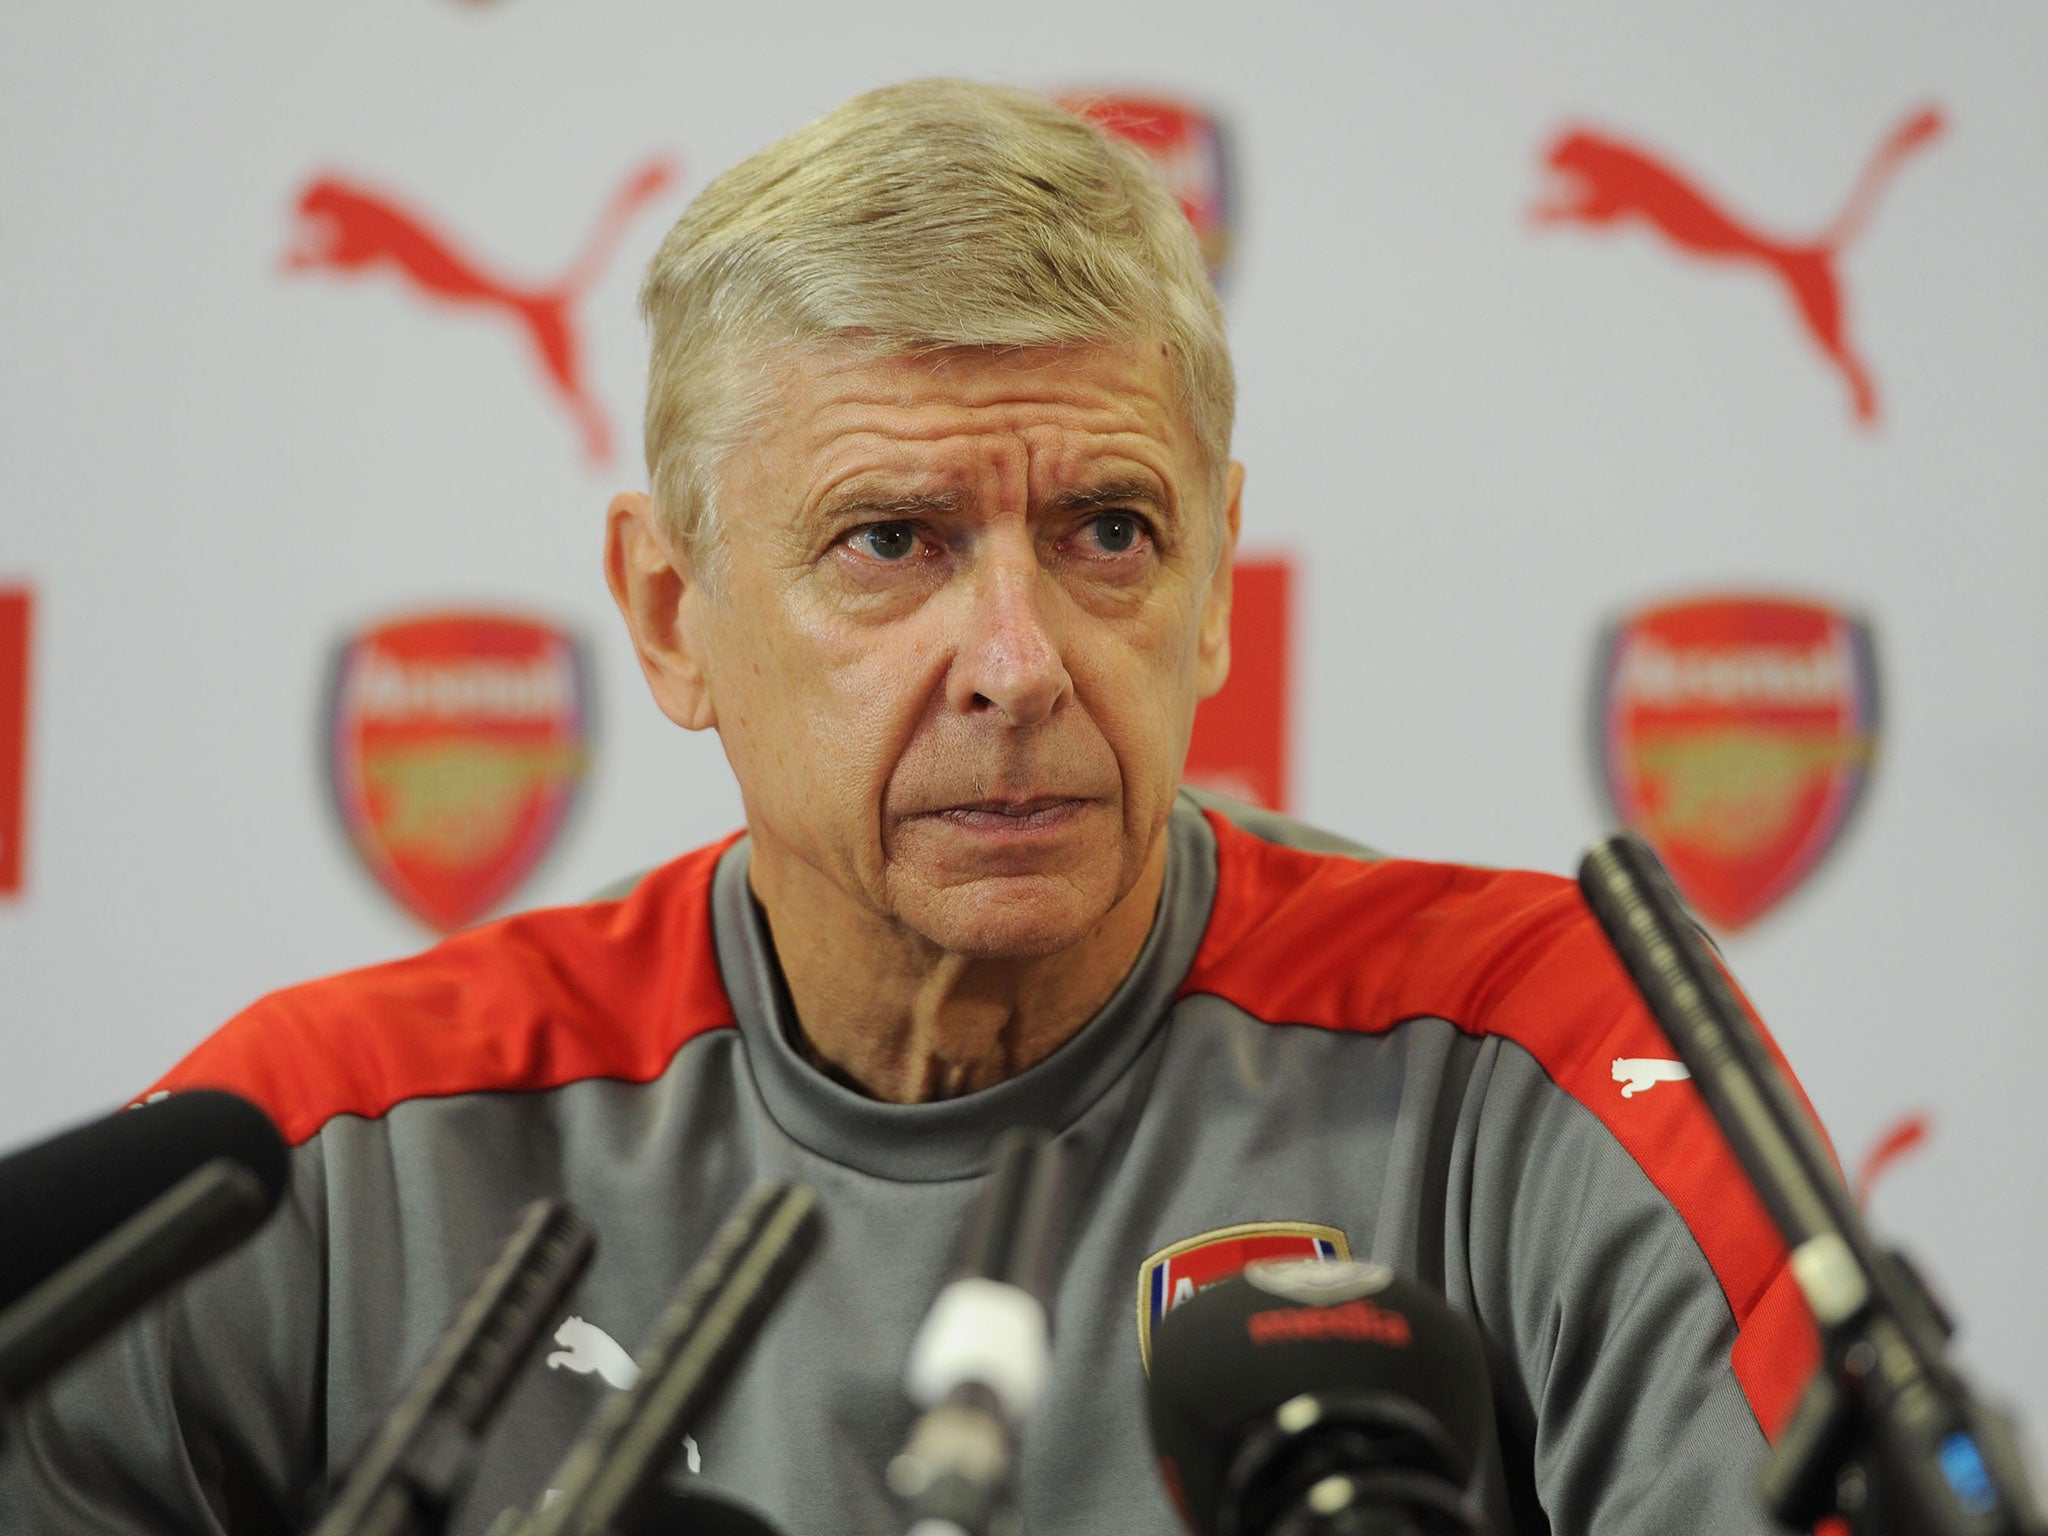 Arsene Wenger spoke on Tuesday ahead of the Champions League